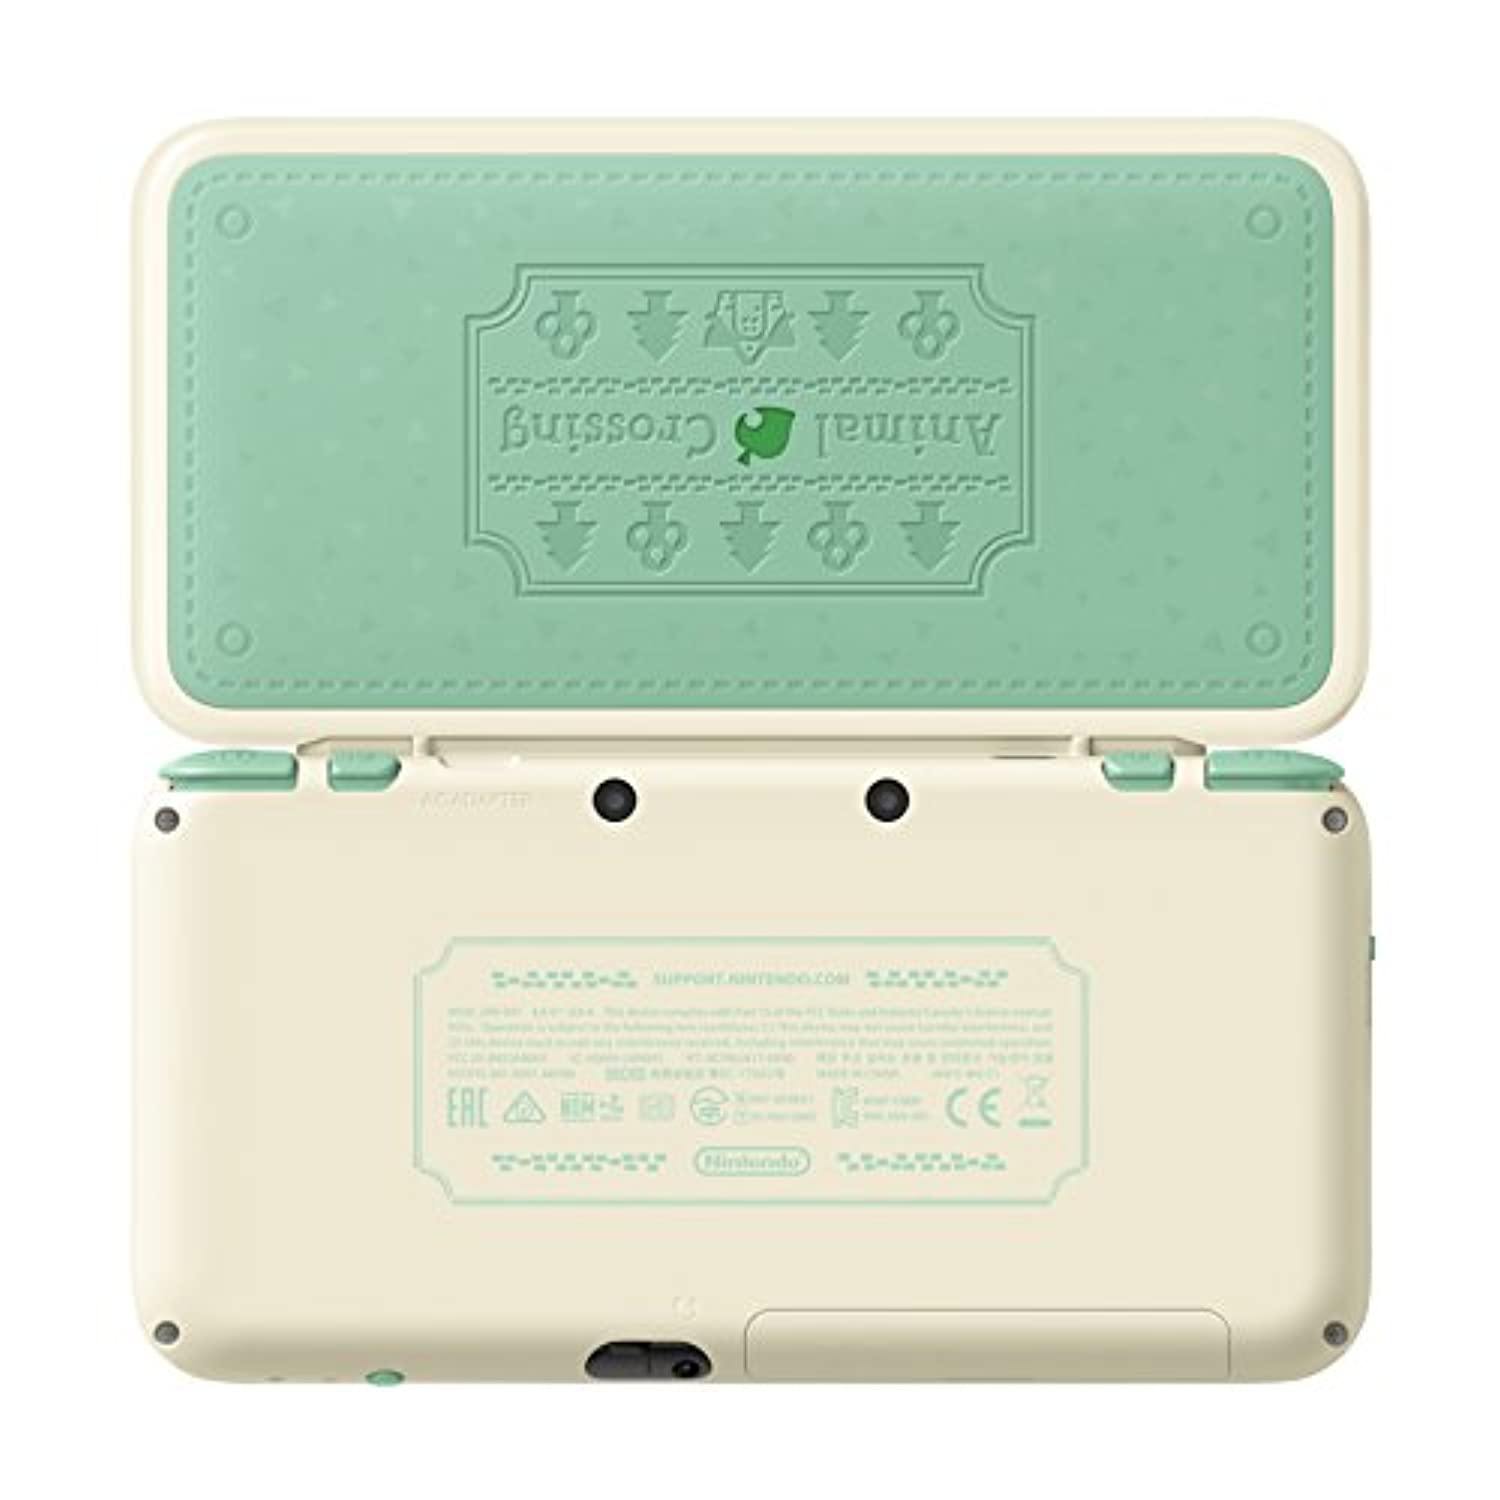 New Nintendo 2DS XL Handheld Animal Crossing Console (USED) - Offer Games